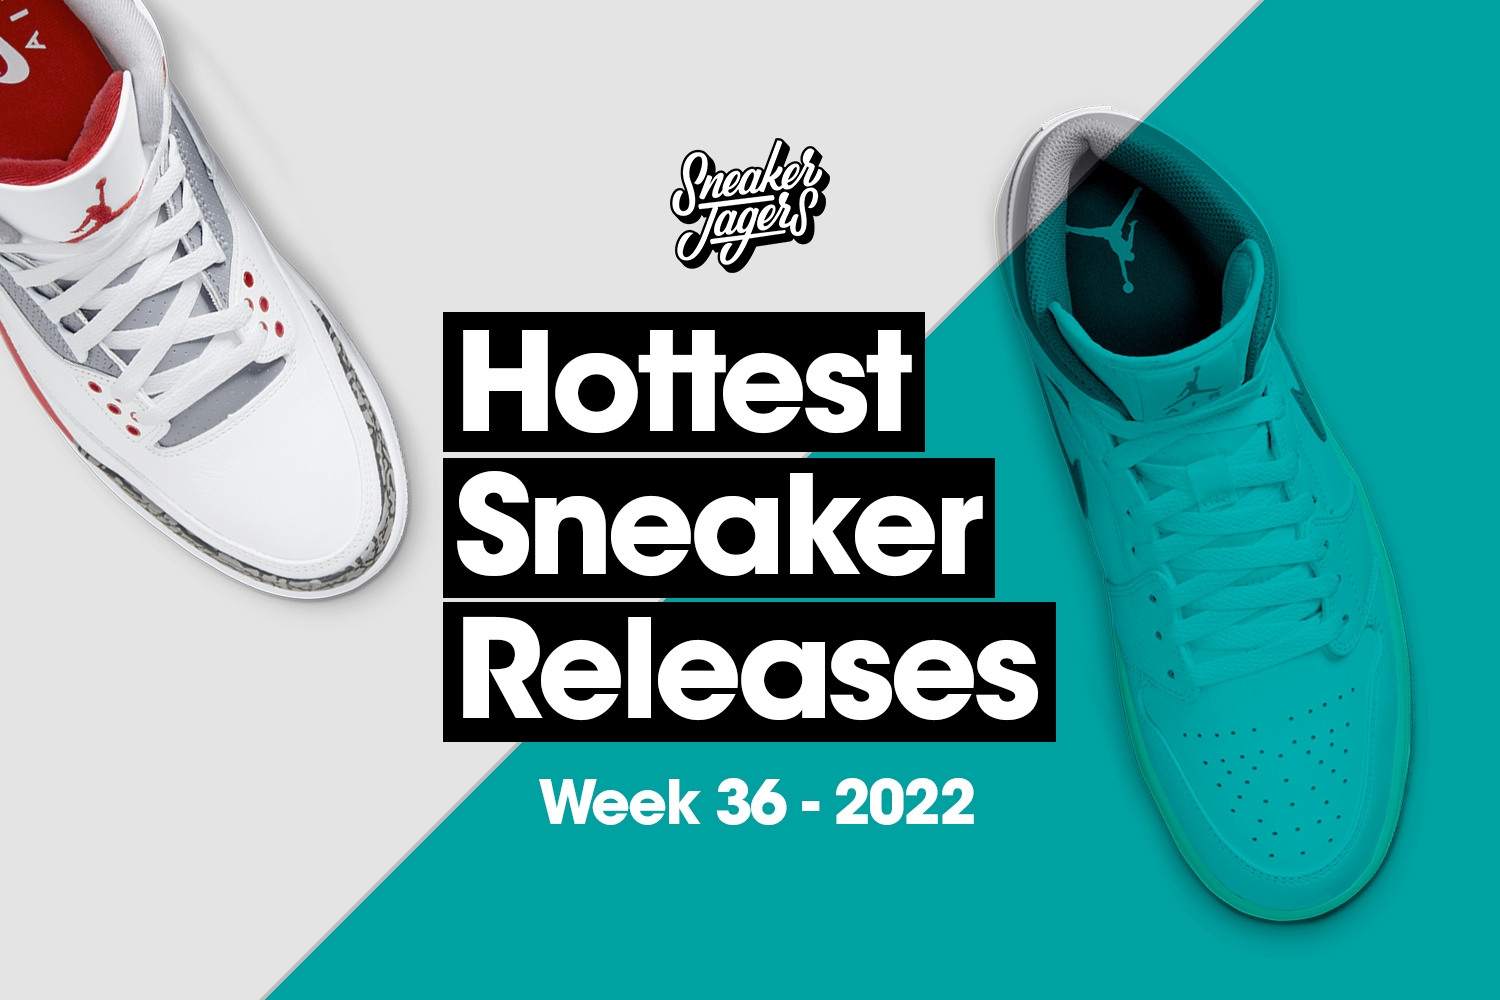 Hottest Sneaker Releases - WK 36